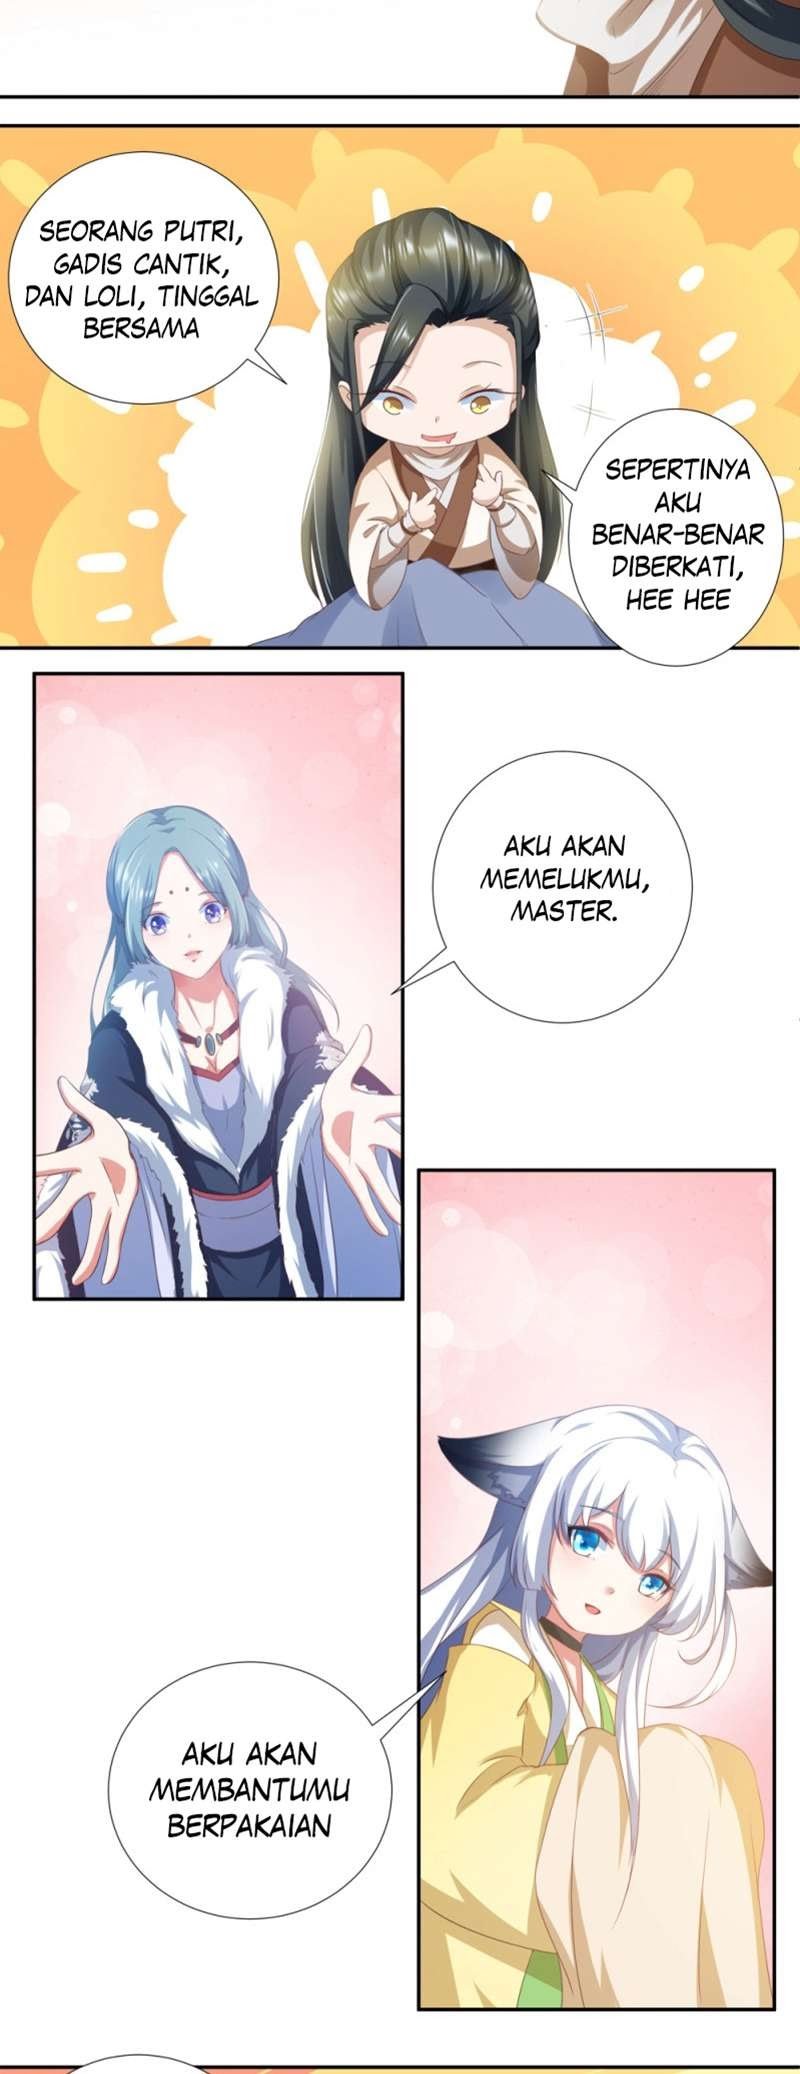 Call Me Master Chapter 01